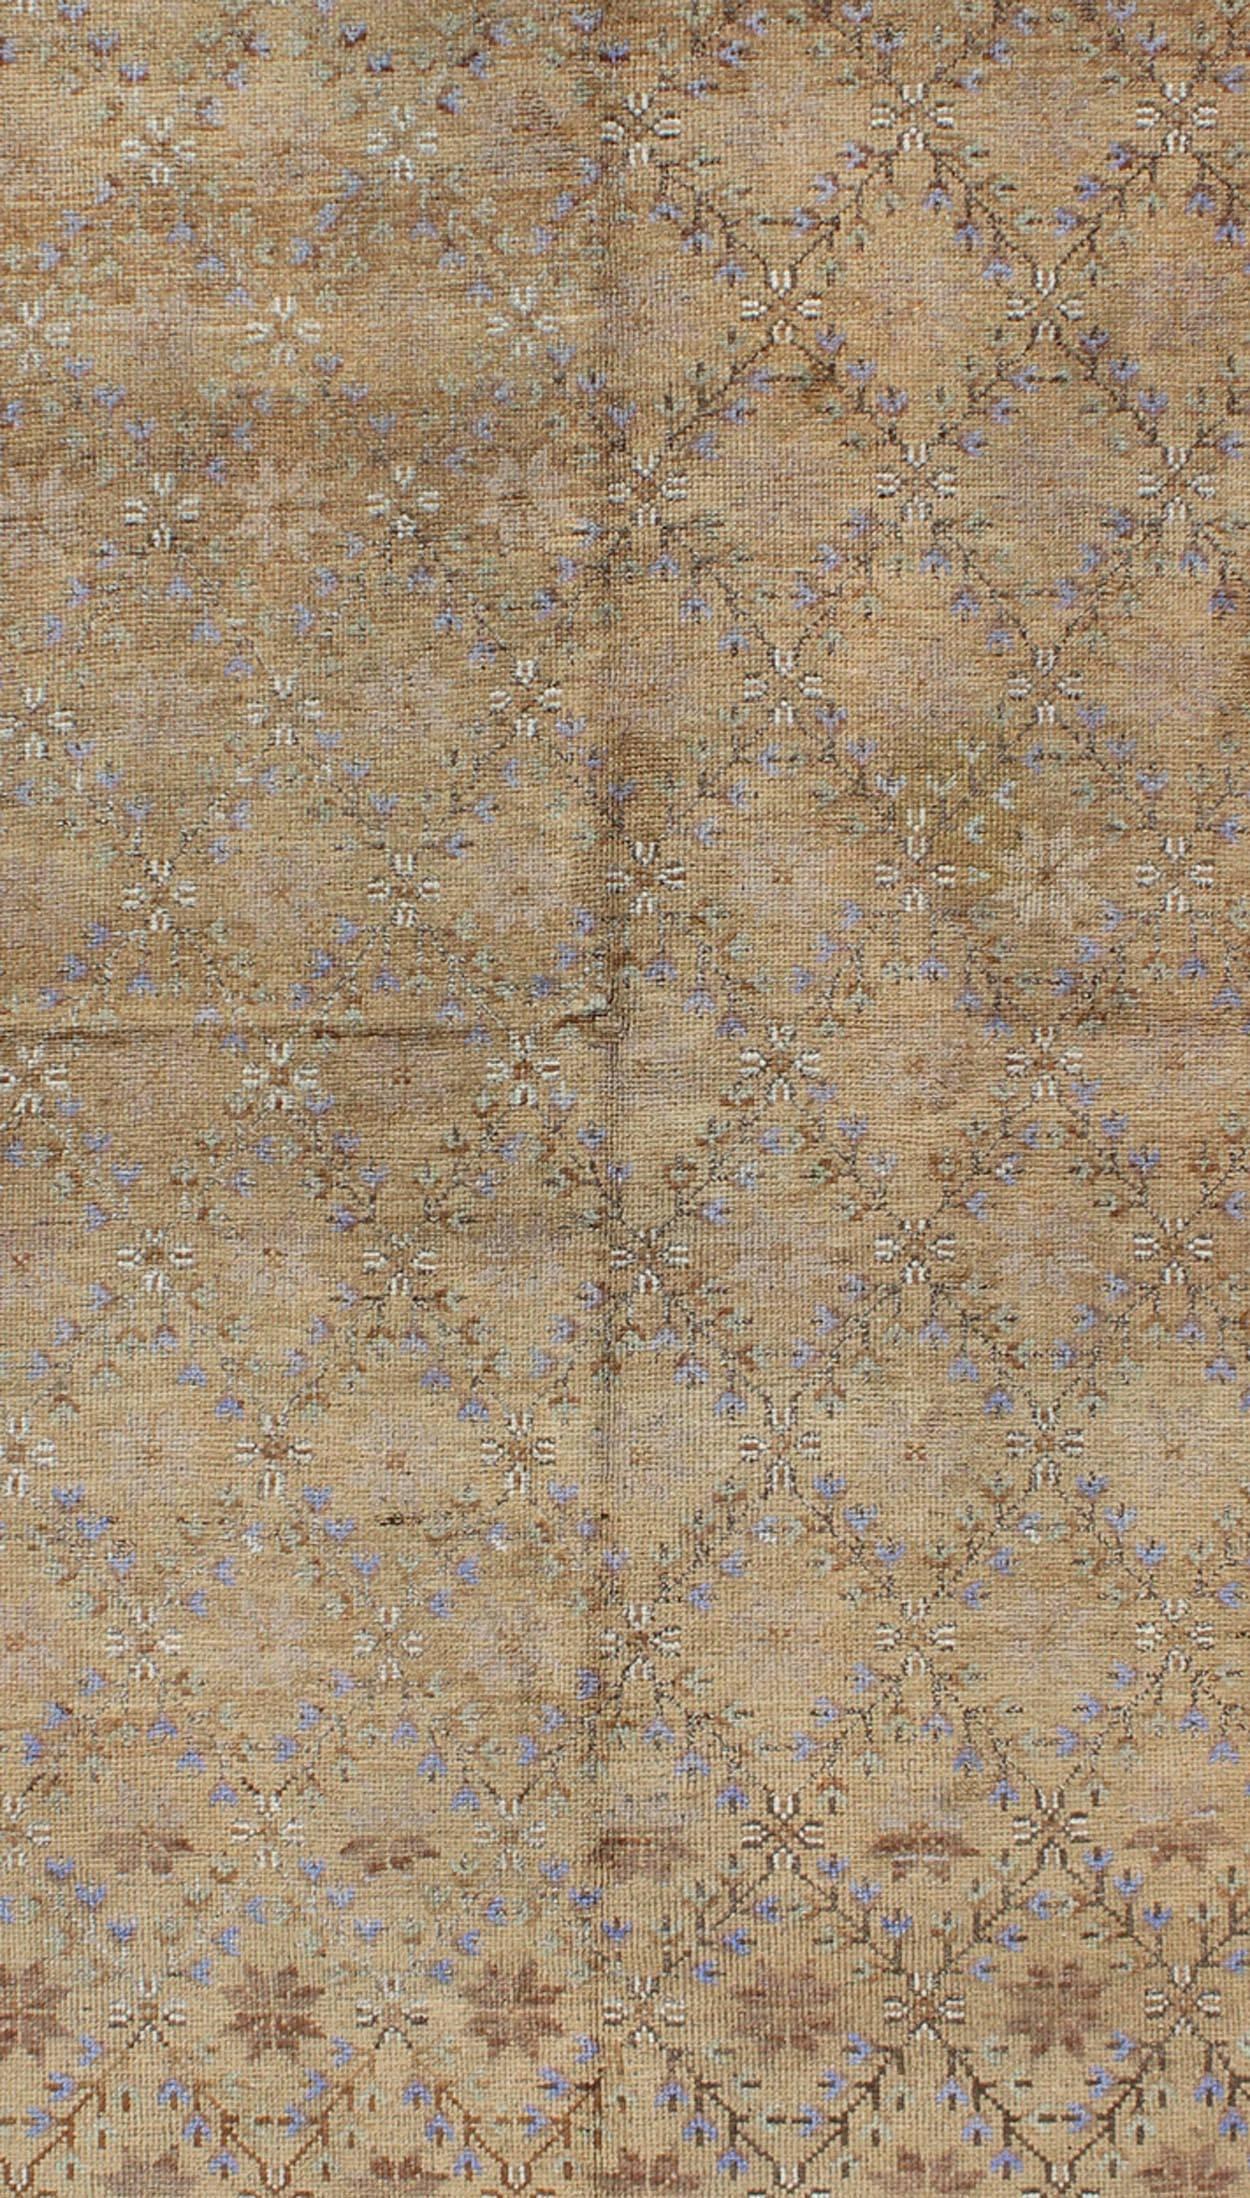 Hand-Knotted Turkish Oushak Rug with All-Over Design and Neutral Colors; Tan, Taupe, Icy Blue For Sale